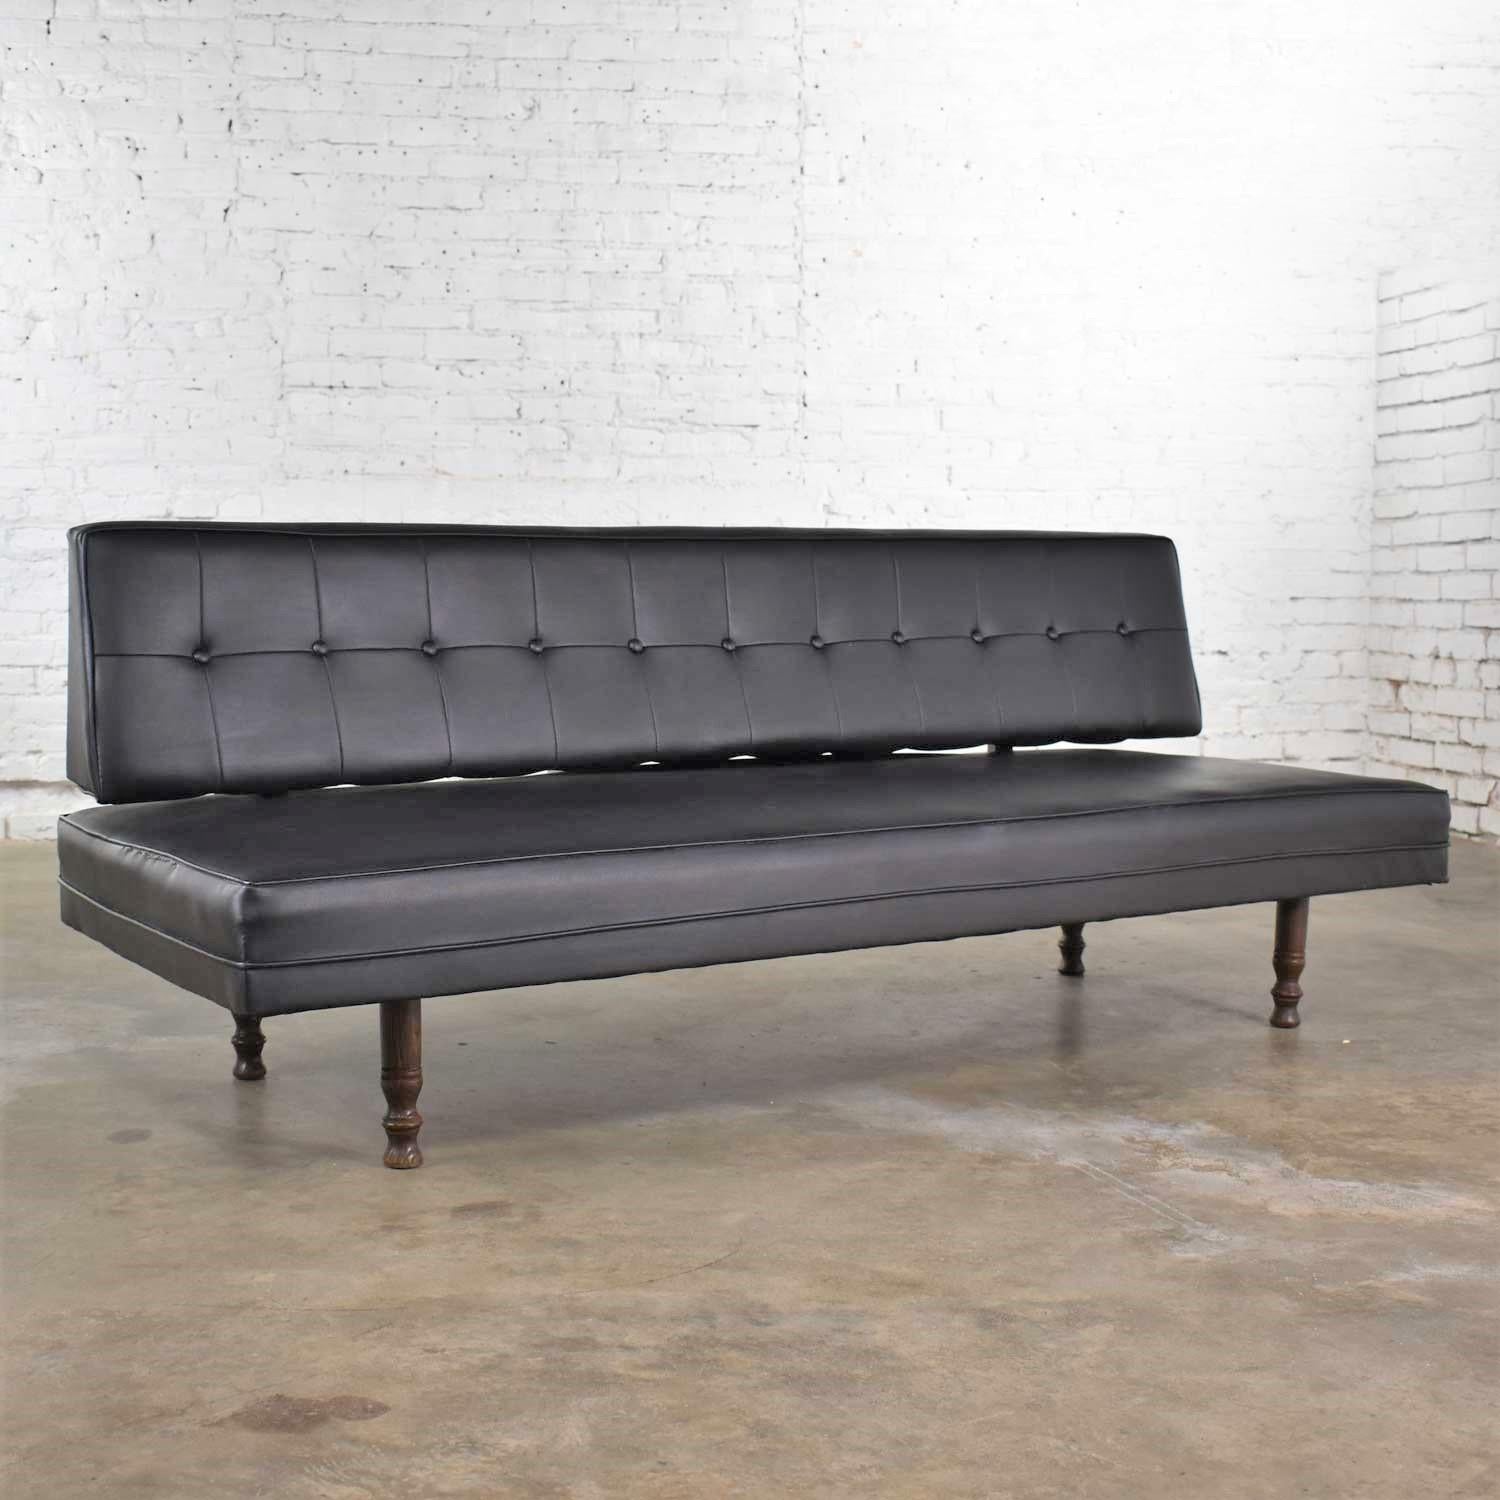 American Universal of High Point Midcentury Black Vinyl Faux Leather Convertible Sofa For Sale